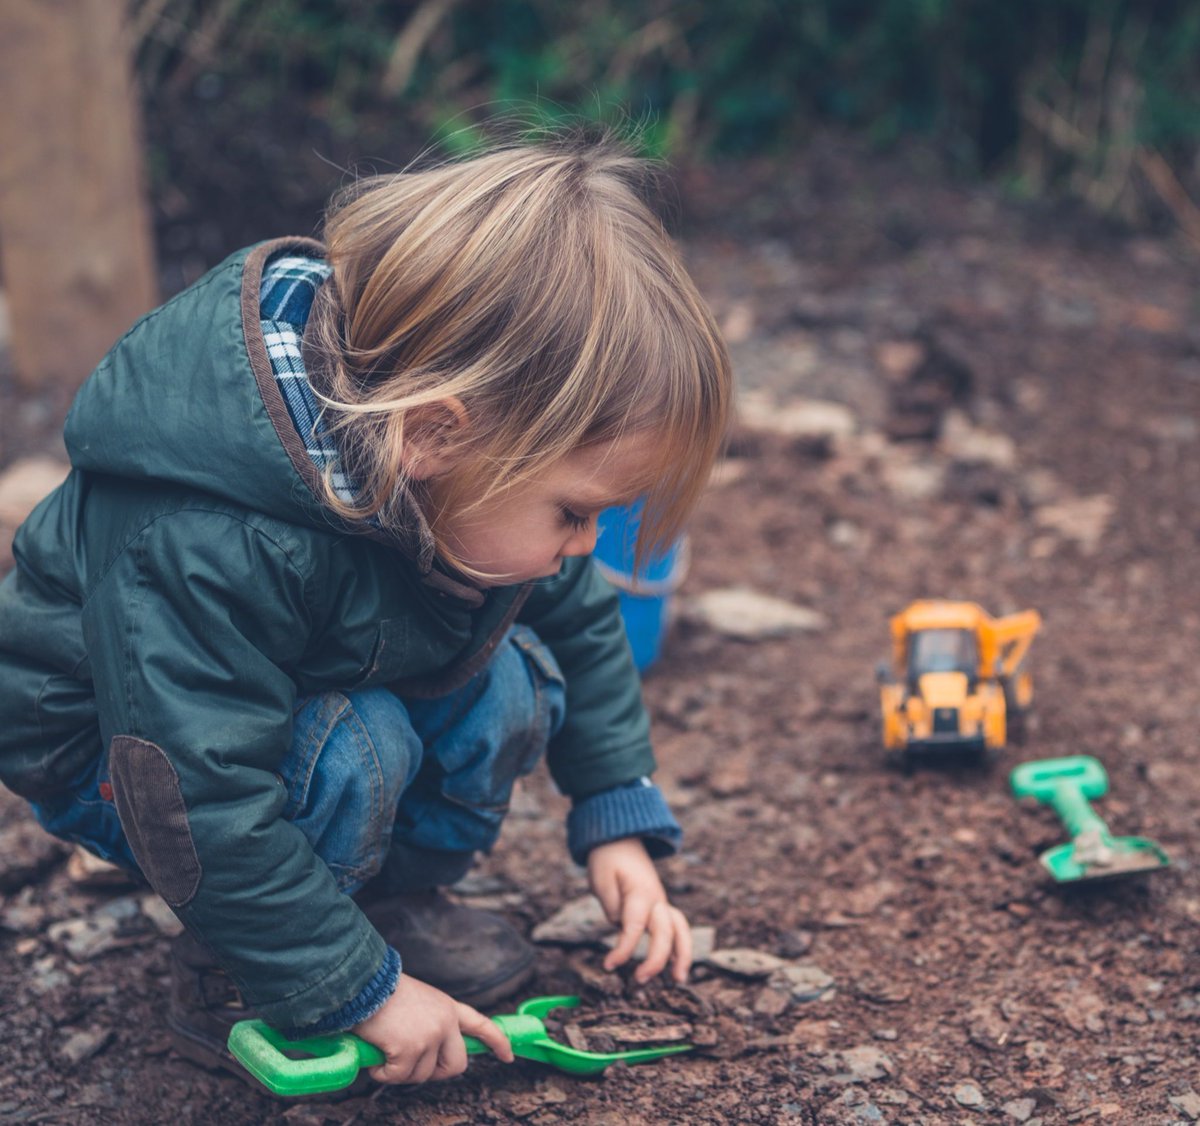 ❄ It might be low temperatures but that doesn't have to mean no #outdoorplay. Bundle up and head outside with our #natureplay booklet, and use the suggested activities to spark some #playinspiration this week 👣 #playmore buff.ly/3SSoygD